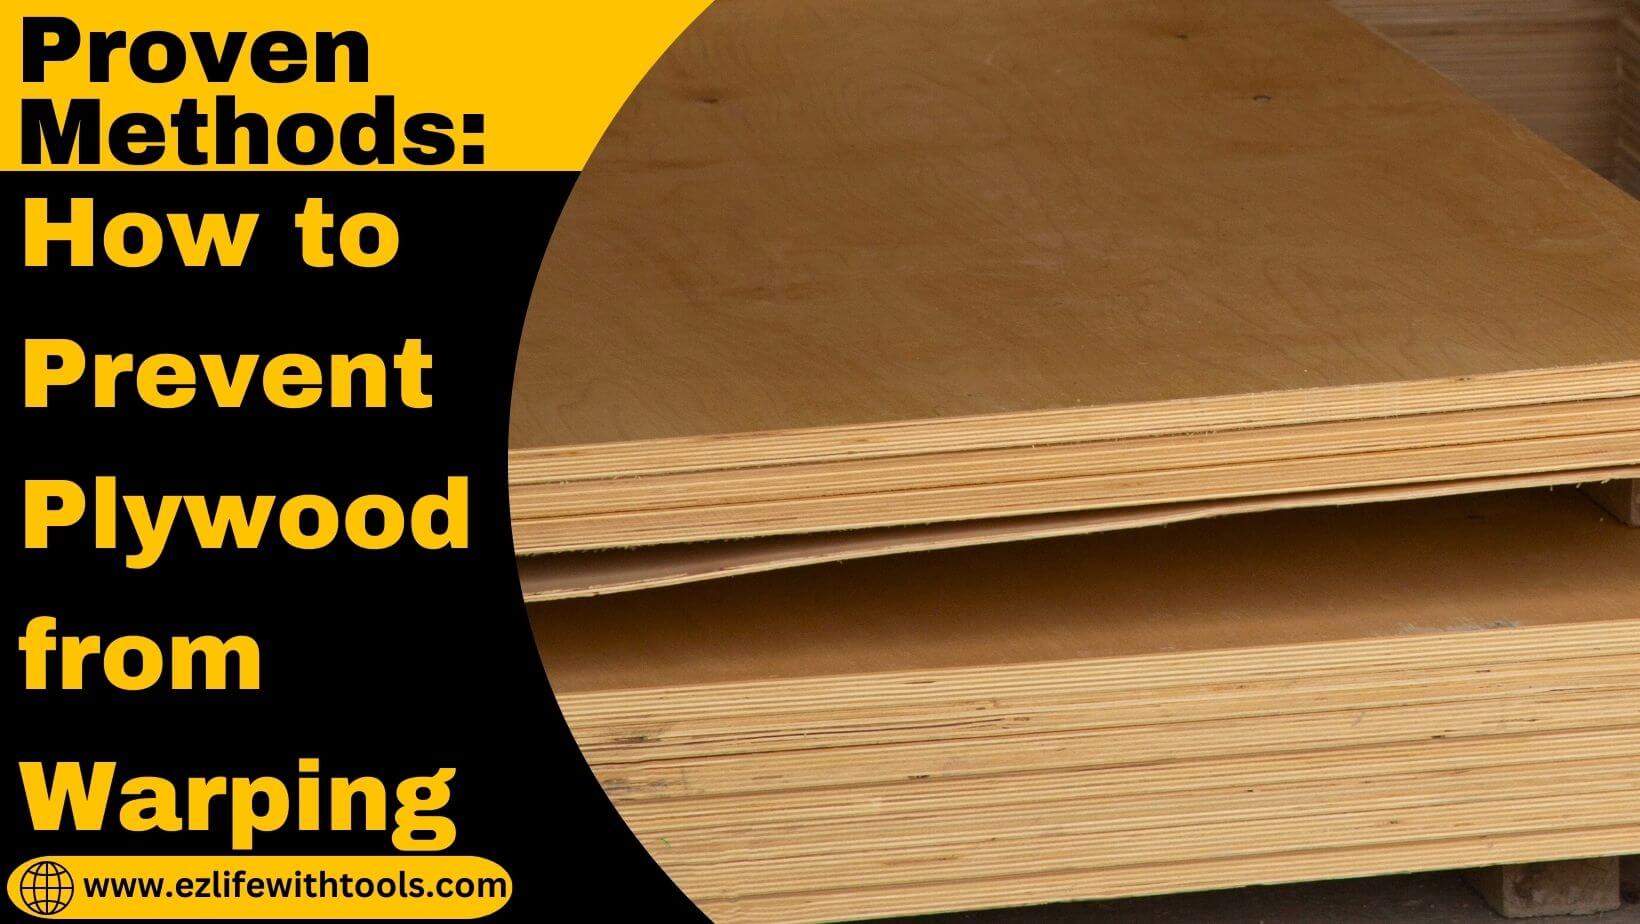 How to Prevent Plywood from Warping